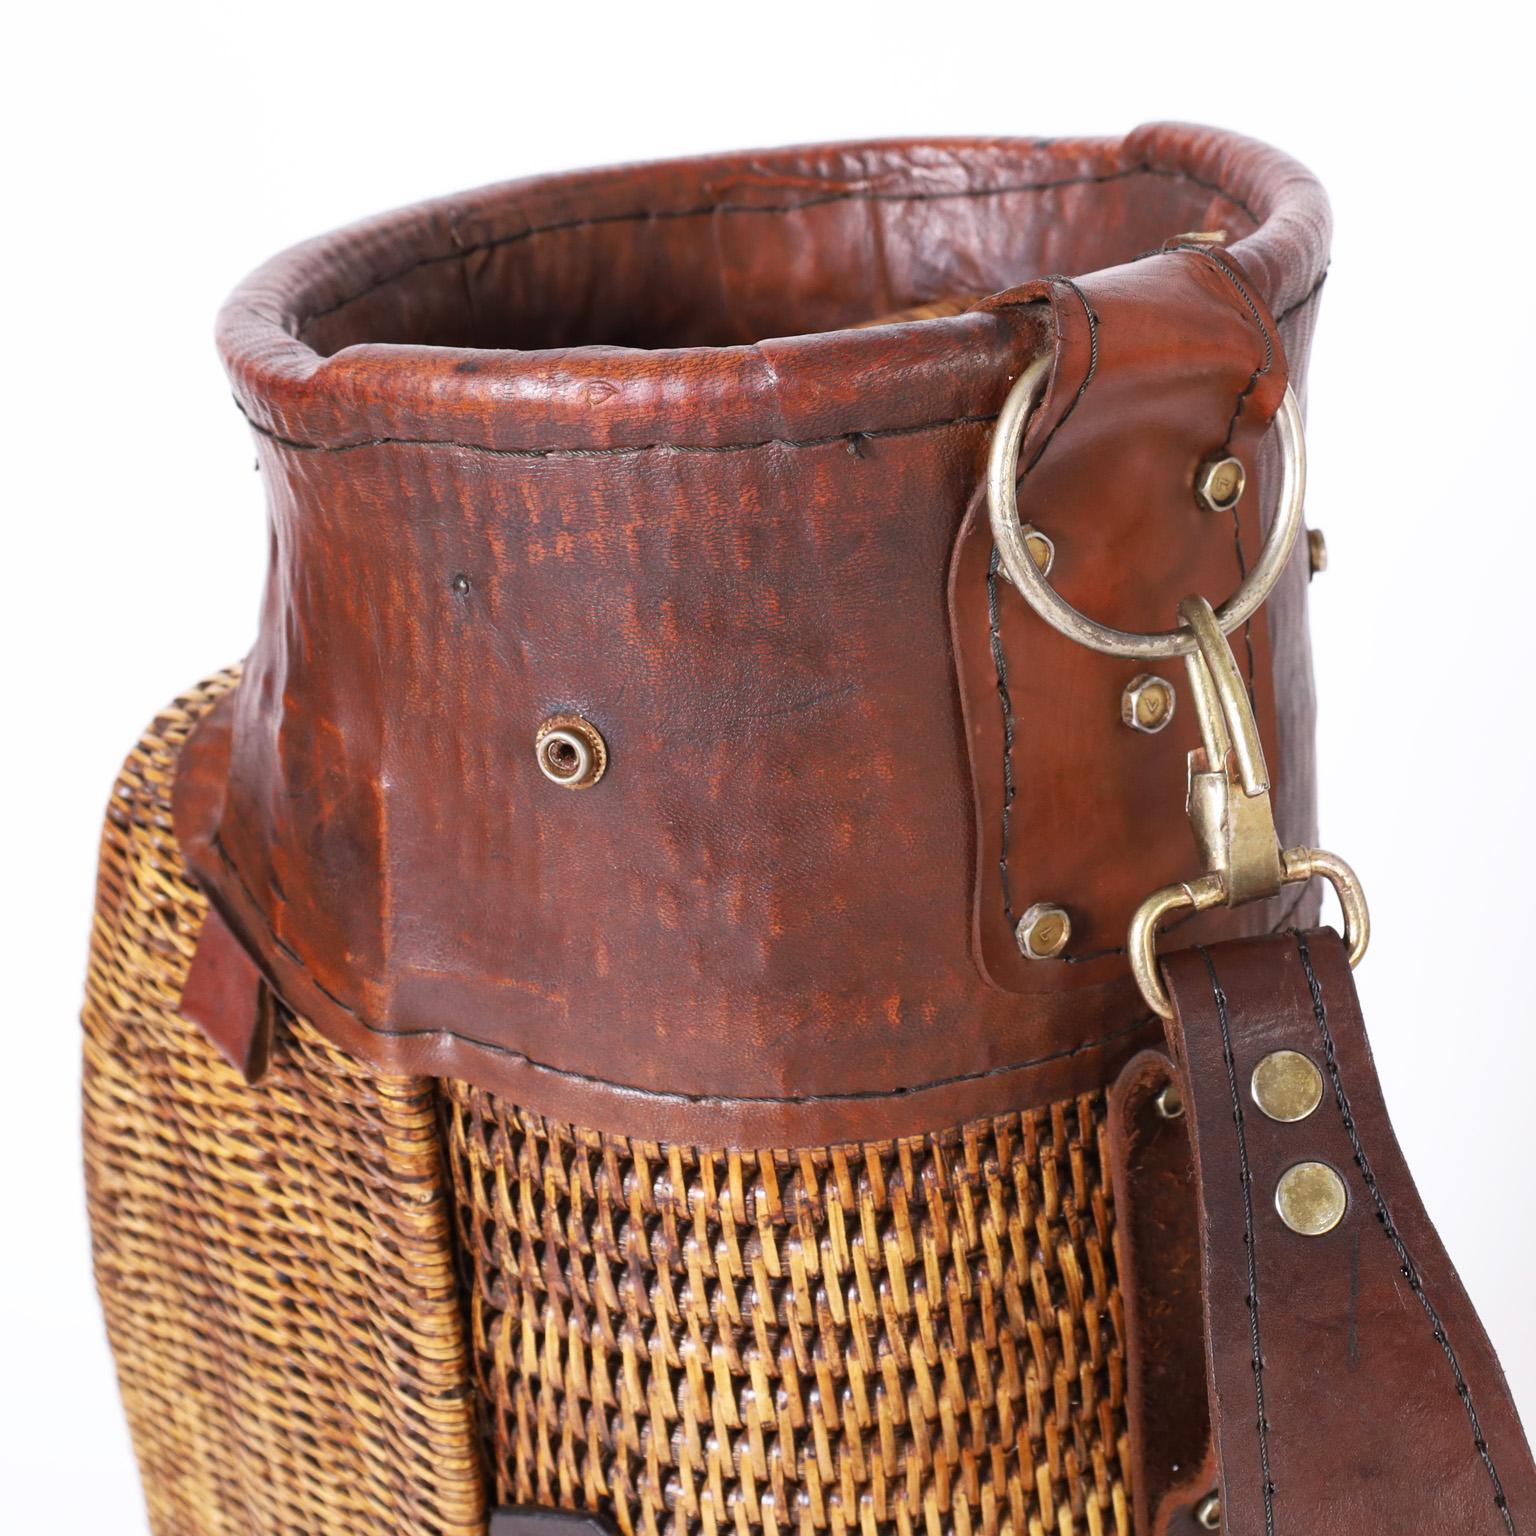 Woven Vintage British Colonial Style Wicker Golf Bag For Sale